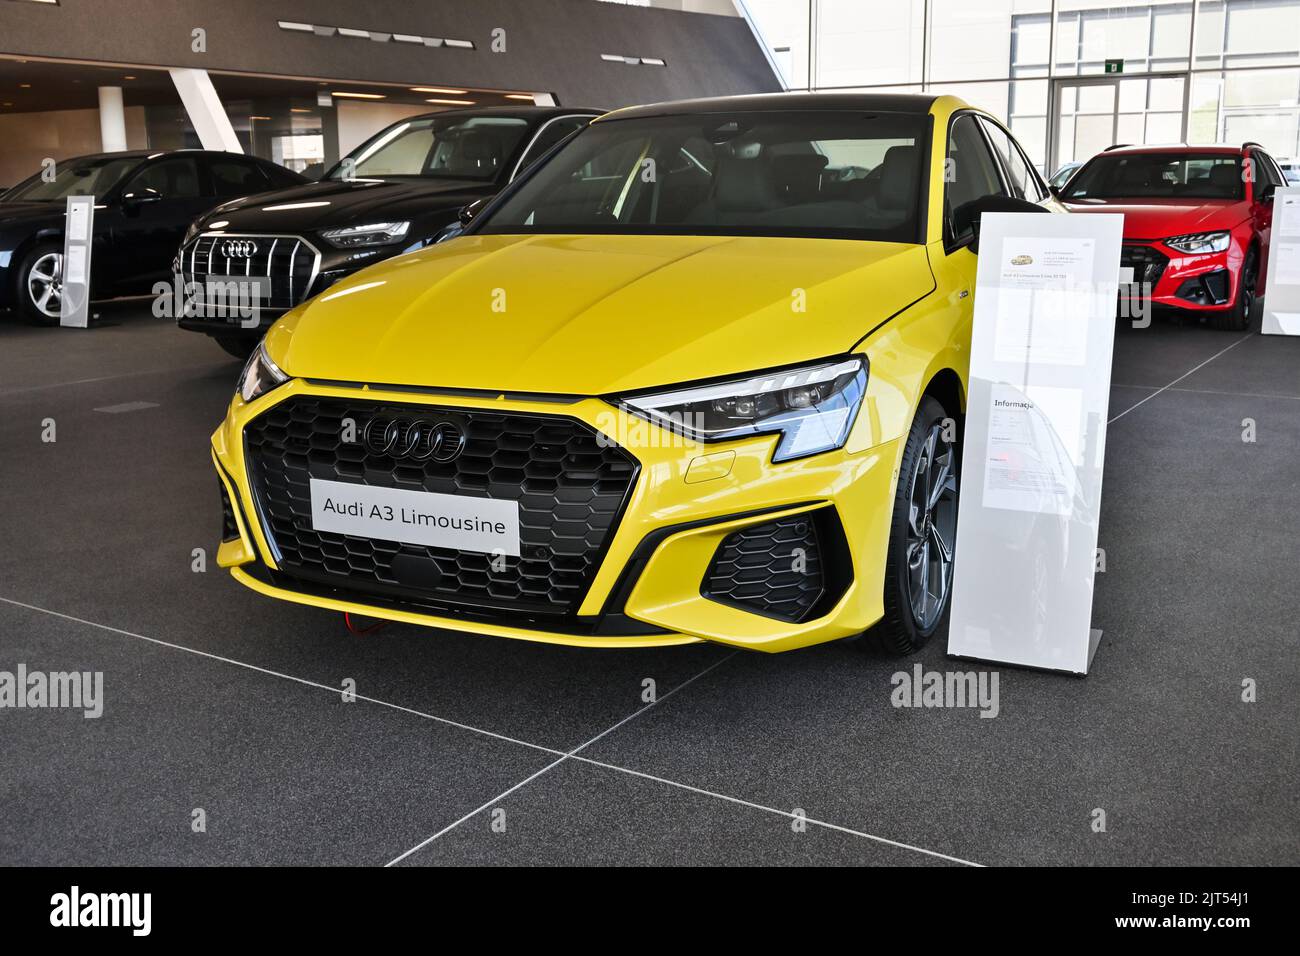 Gdansk, Poland - August 27, 2022: New model of Audi A3 Limousine presented in the car showroom of Gdansk Stock Photo